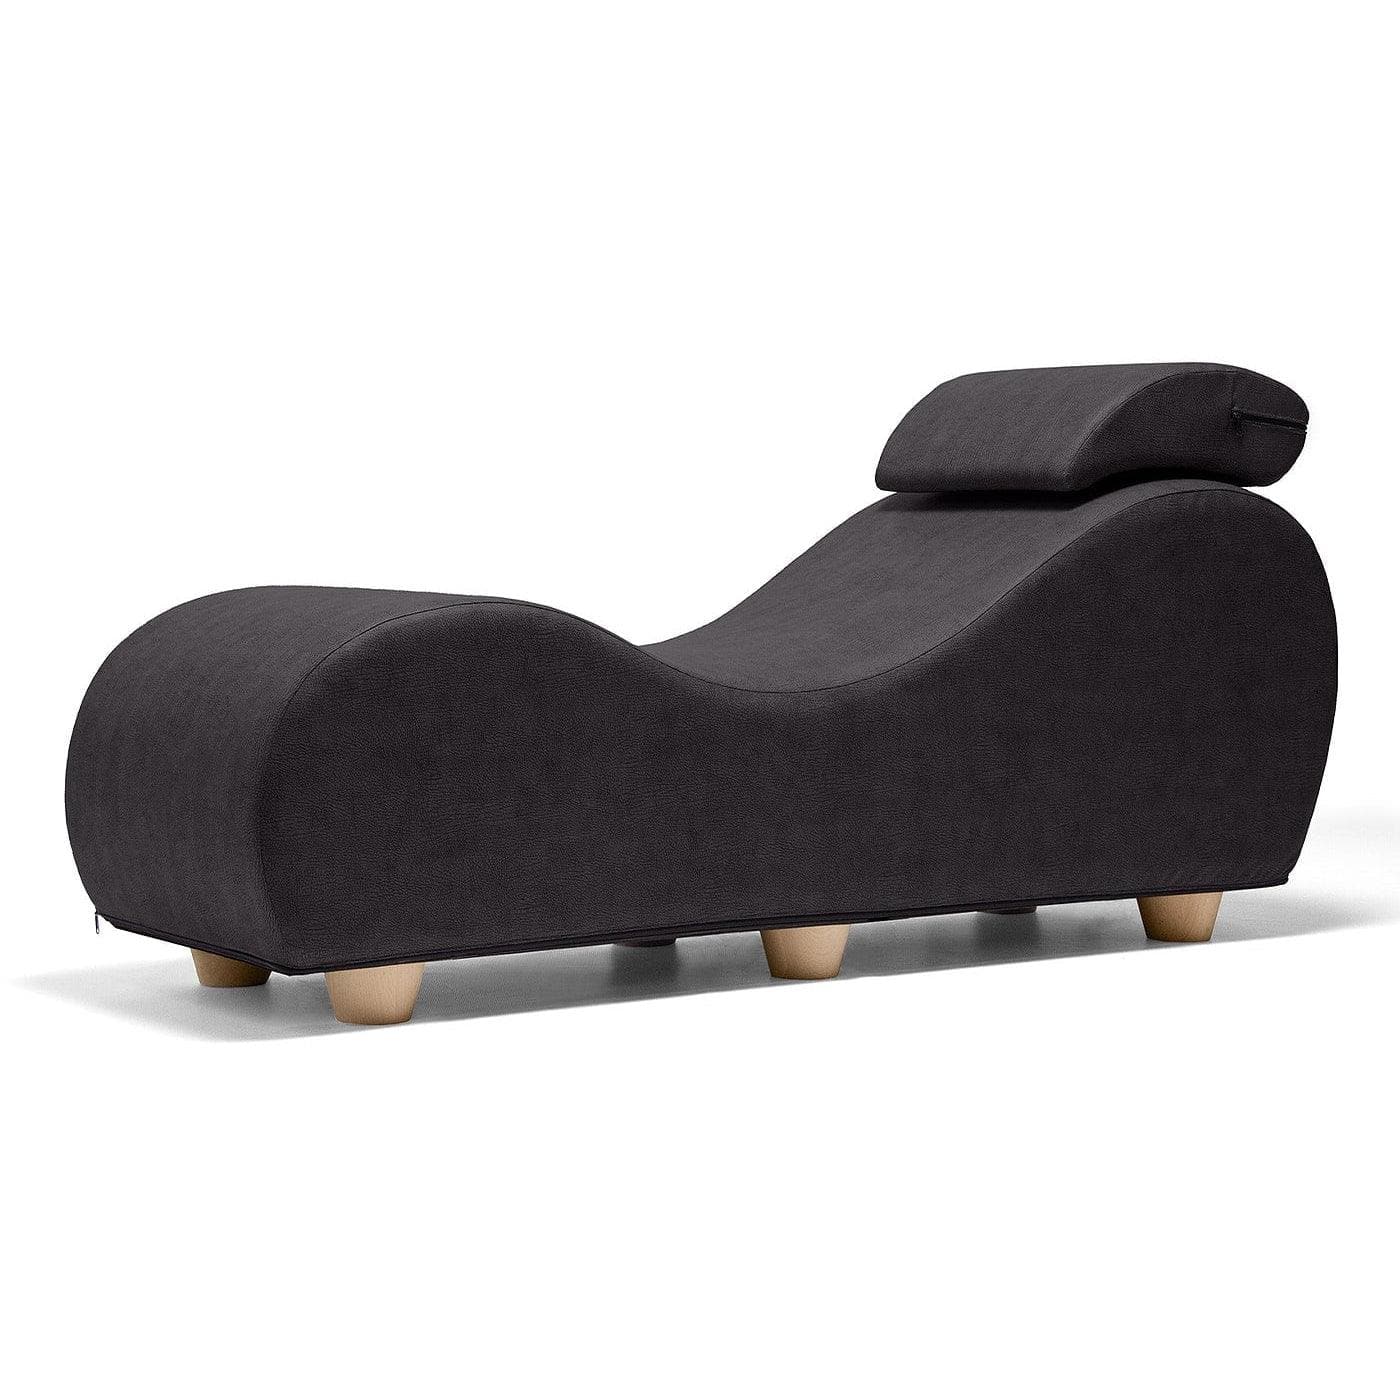 Liberator Esse Chaise II Luxurious Sex Chaise with Wood Feet - Romantic Blessings